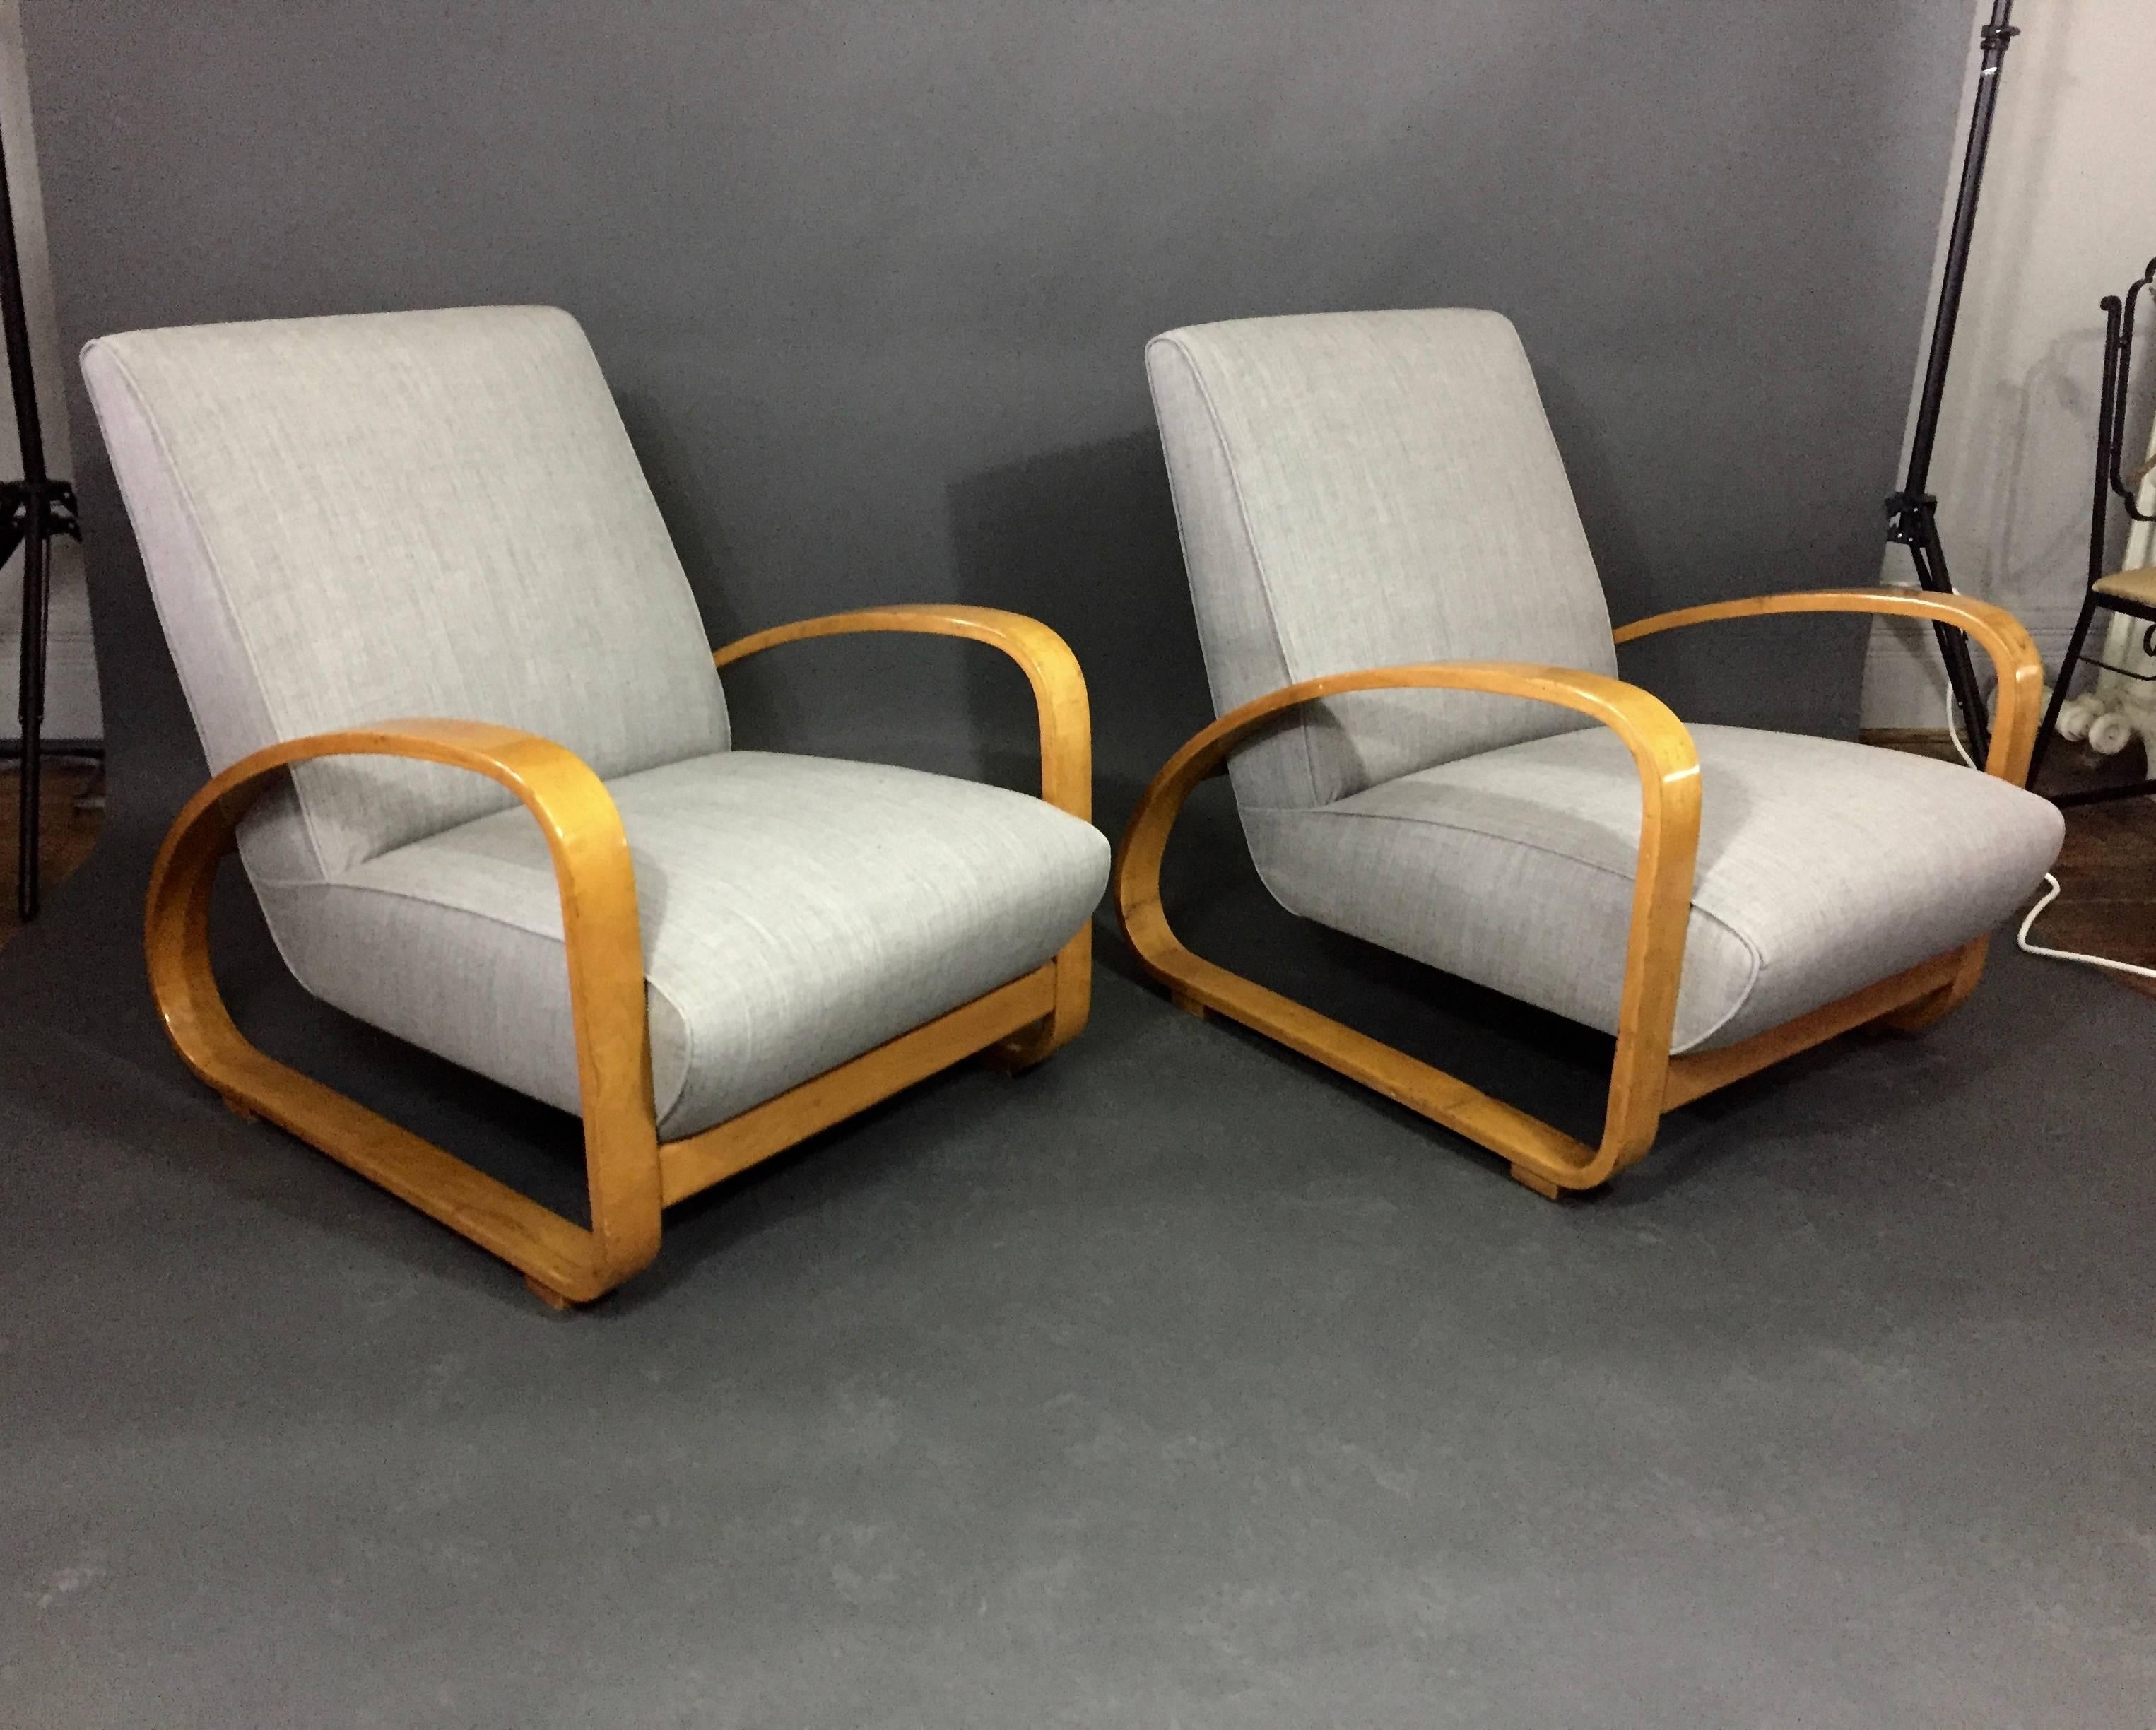 With a hint of 1930s Art Deco styling in the beautiful long arc to the bentwood arms, this pair is made in solid beech with a top lacquer finish. Seating is recently updated with Maharam fabric in light gray to compliment the frame color, Italy,